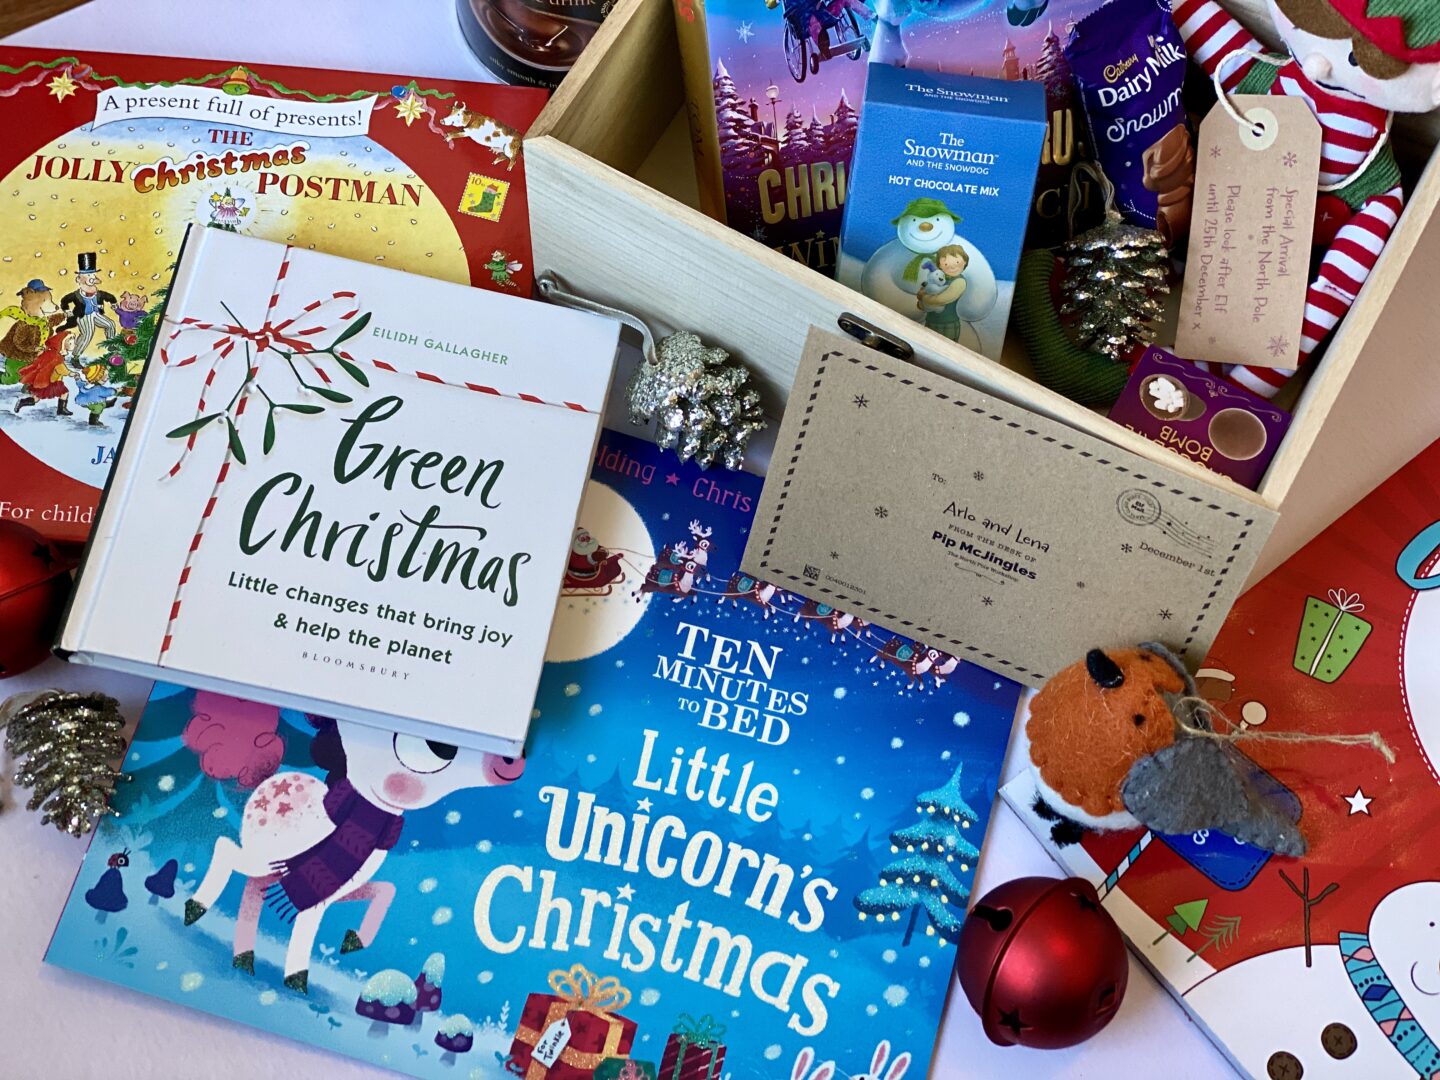 A box full of Christmas items like hot chocolate, books and an elf